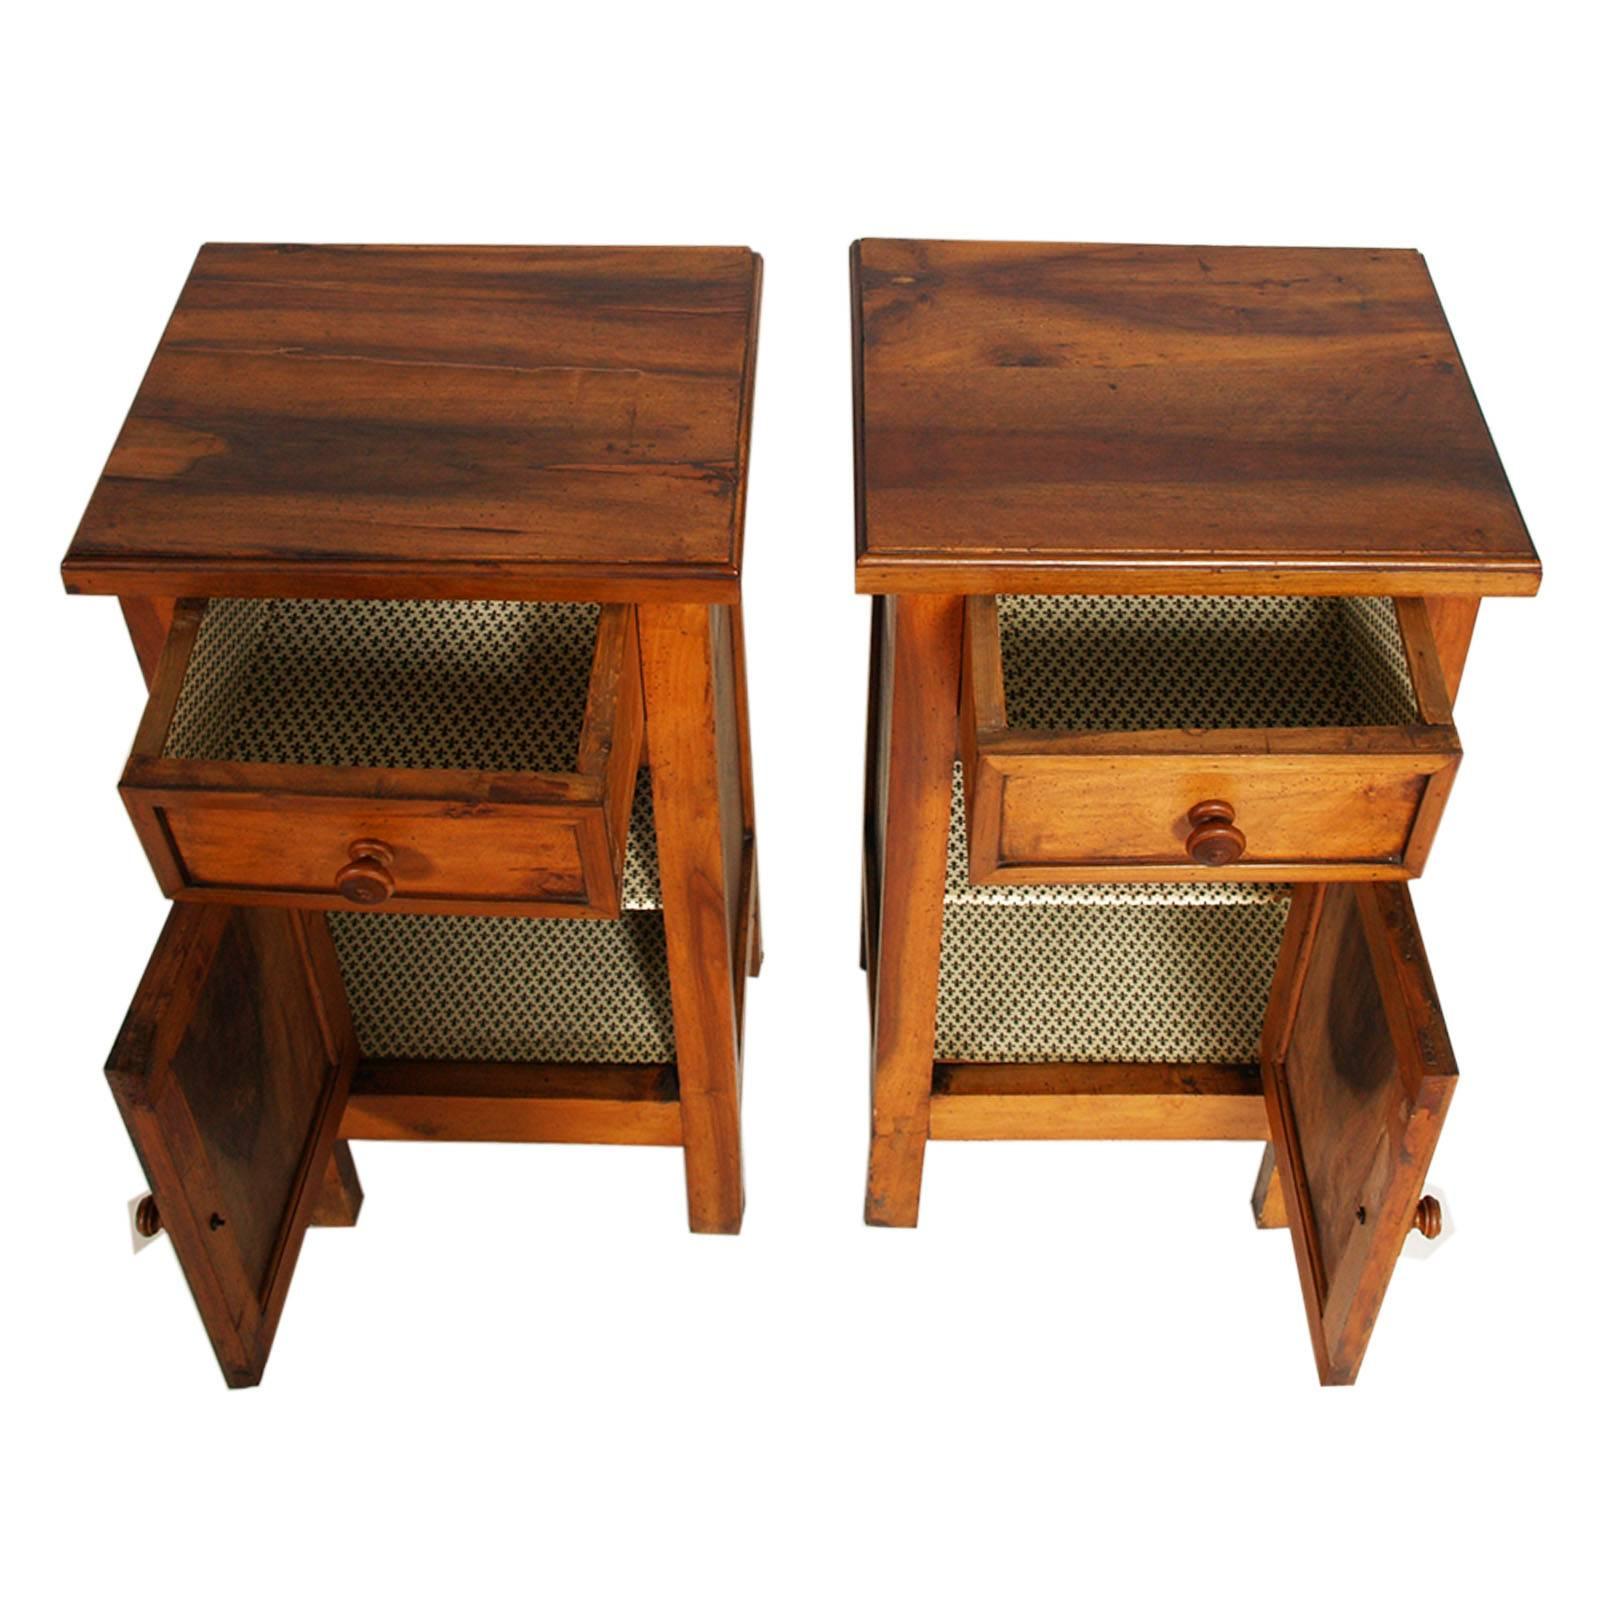 Italian Late 19th Century Country Nightstands in Solid Walnut, Polished to Wax For Sale 2